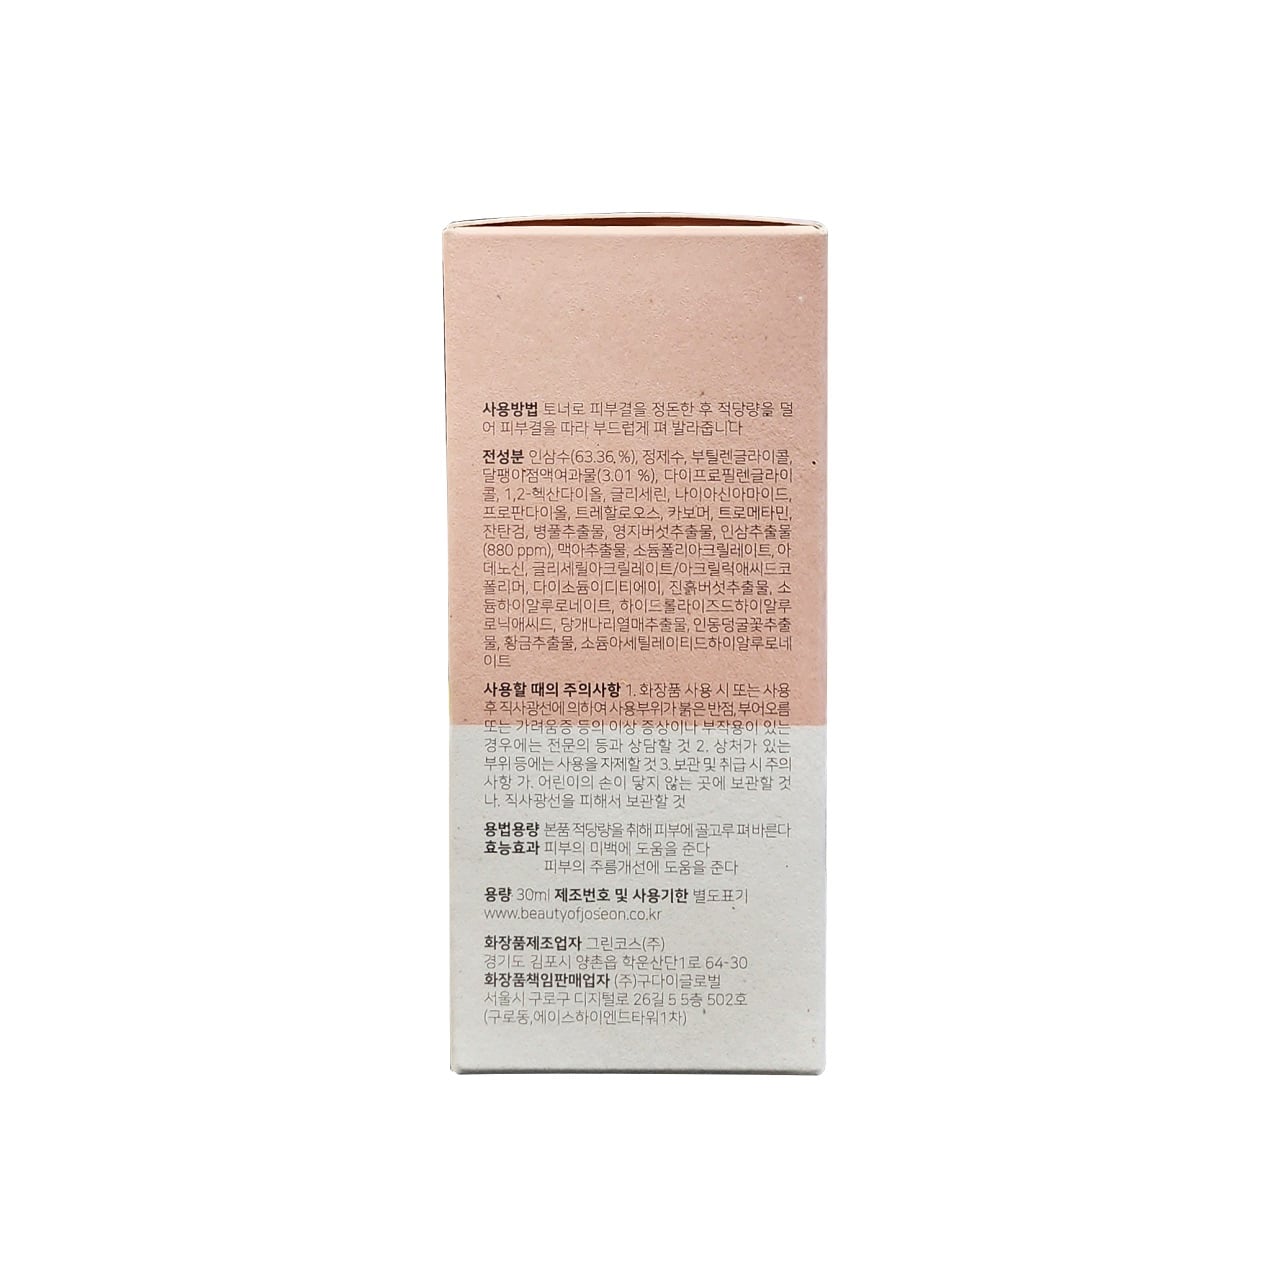 Directions, ingredients, cautions for Beauty of Joseon Revive Serum Ginseng + Snail Mucin (30 mL) in French